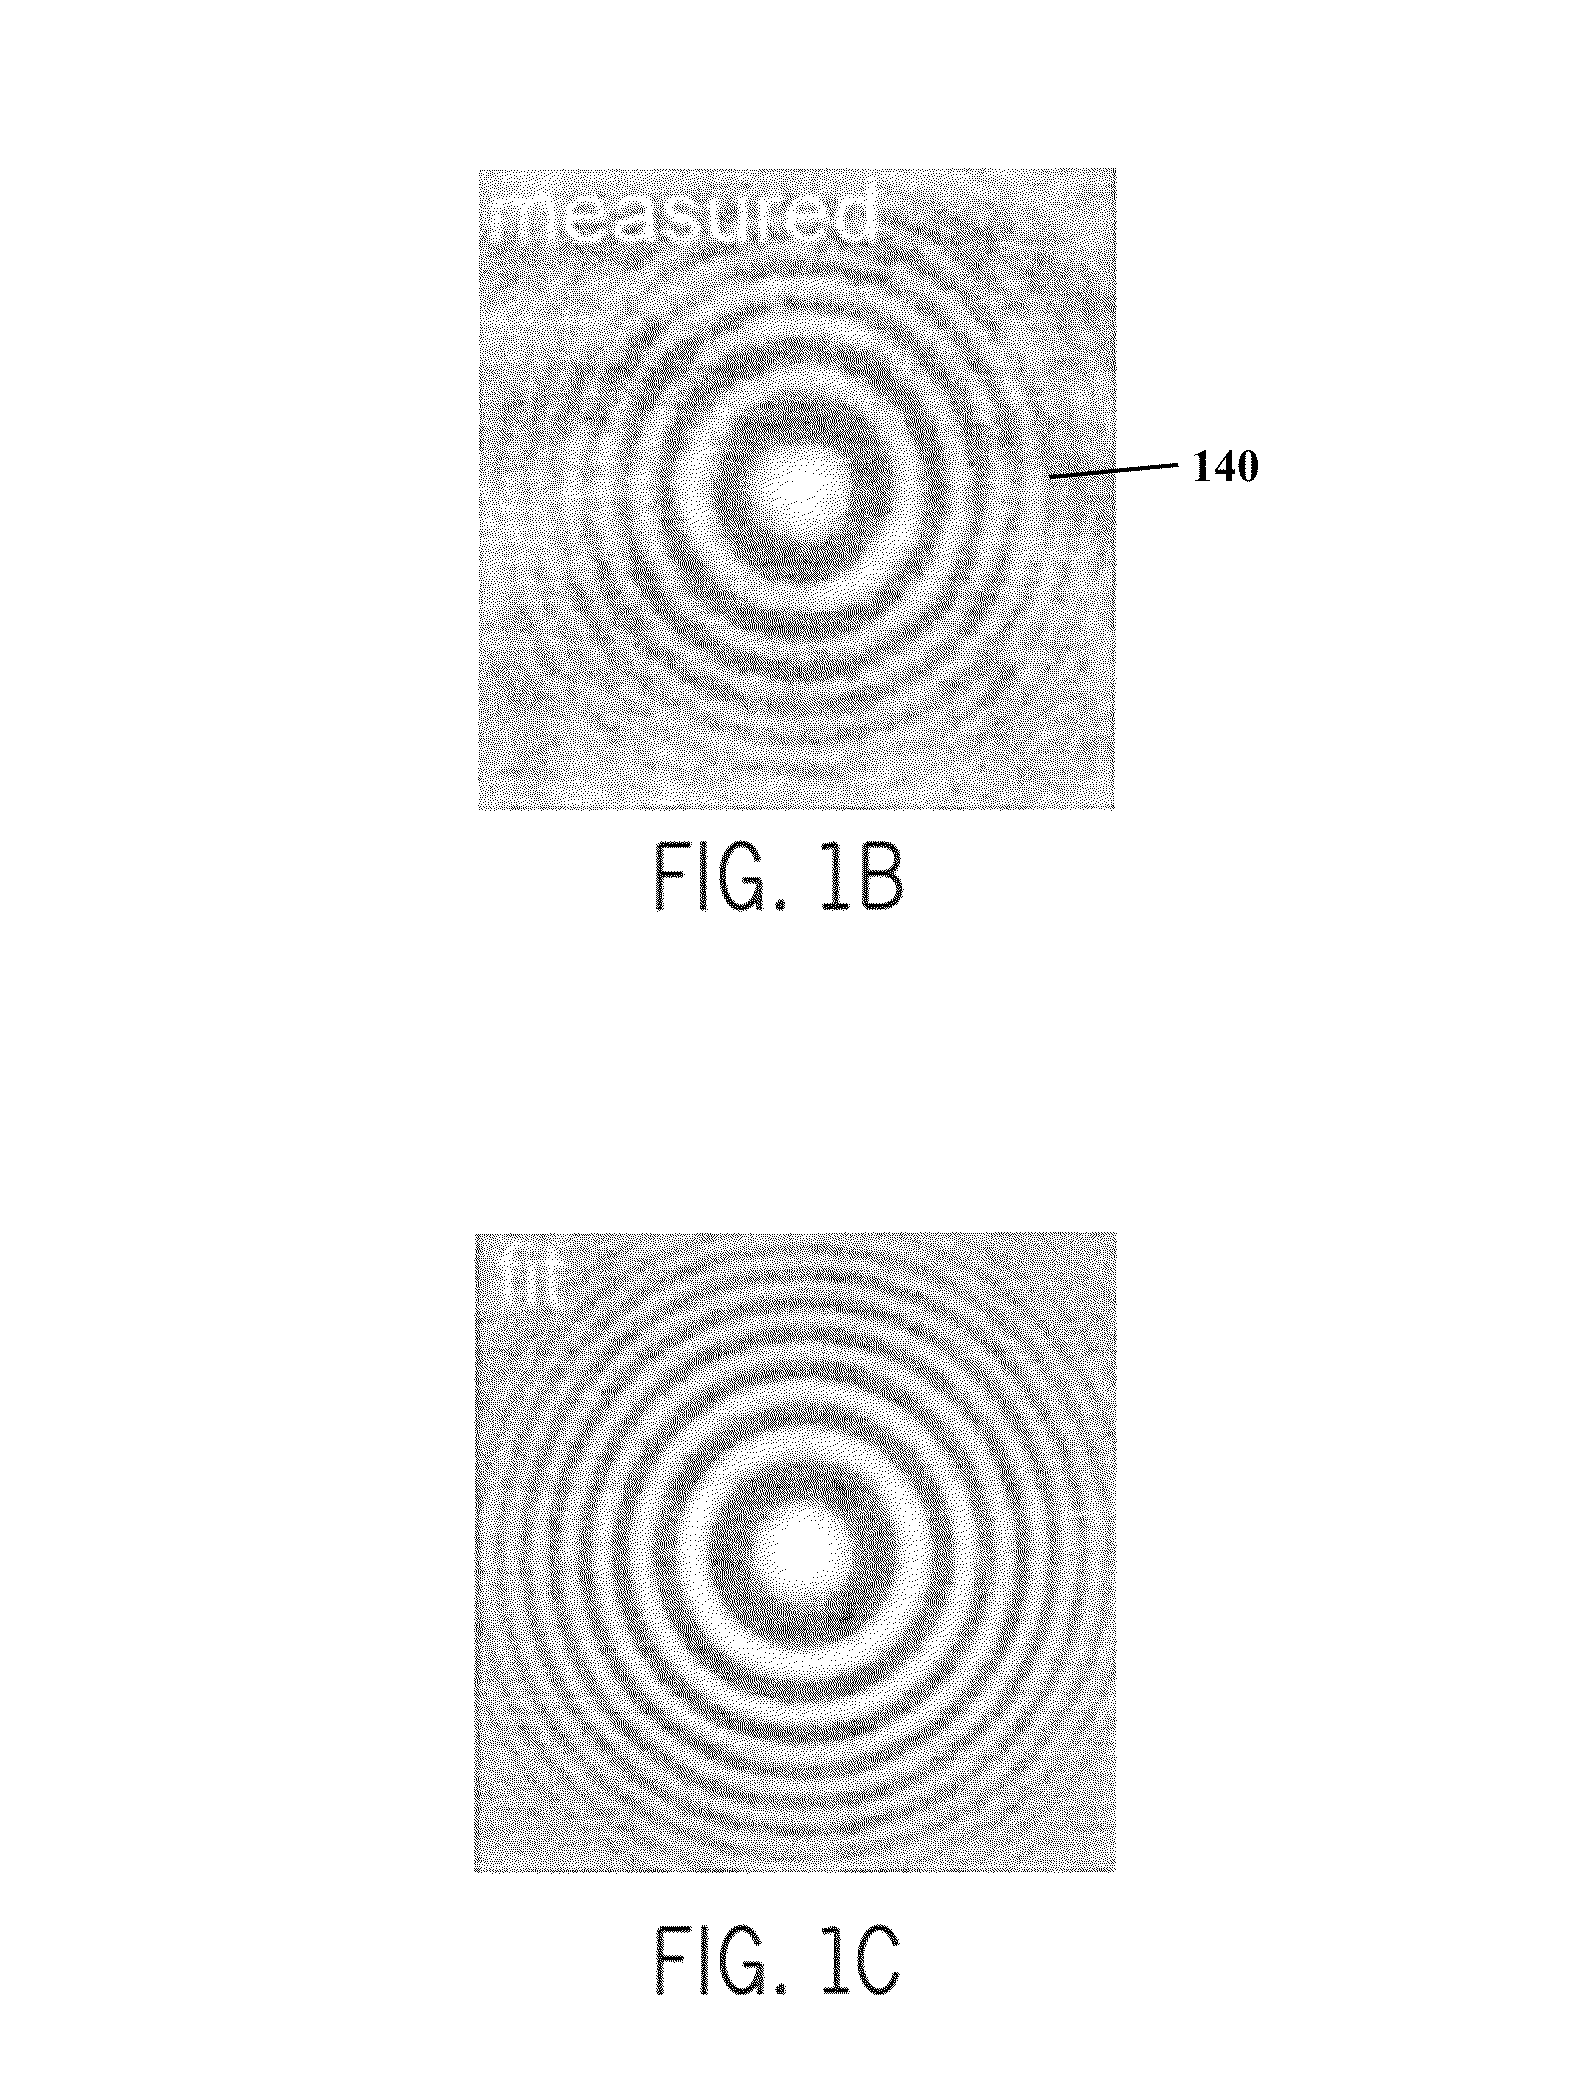 Holographic microrefractometer for determining refractive index of a medium